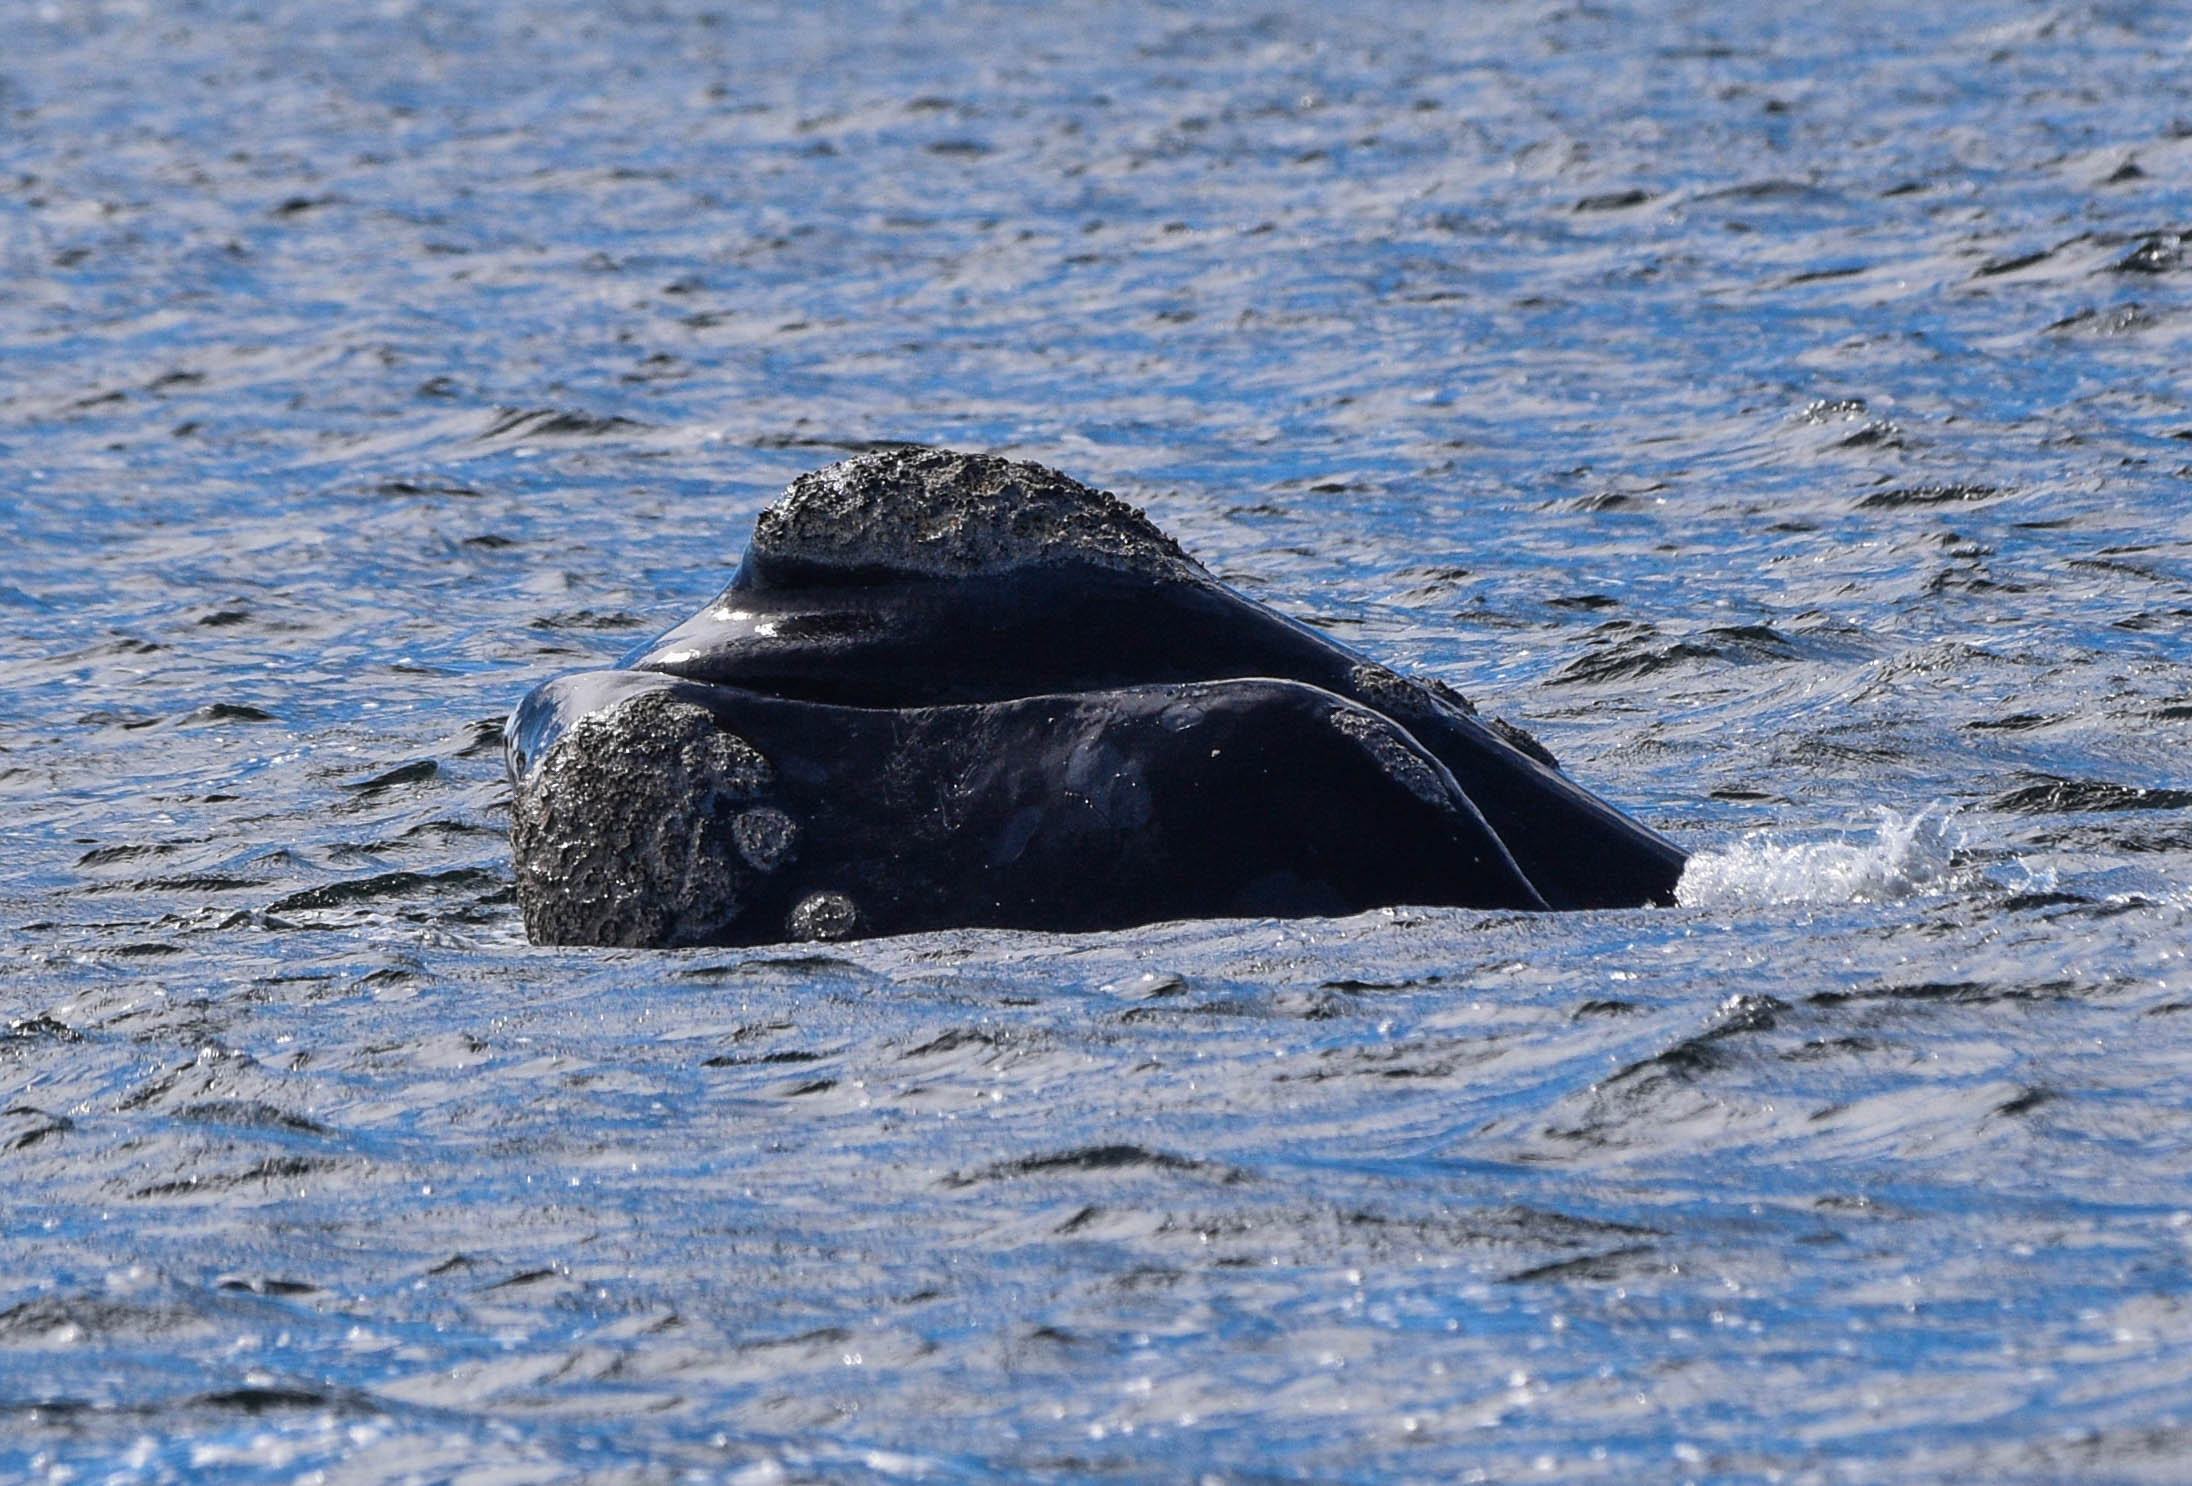 3 Hour Winter Whale Safari (May - Oct) around King George Sound